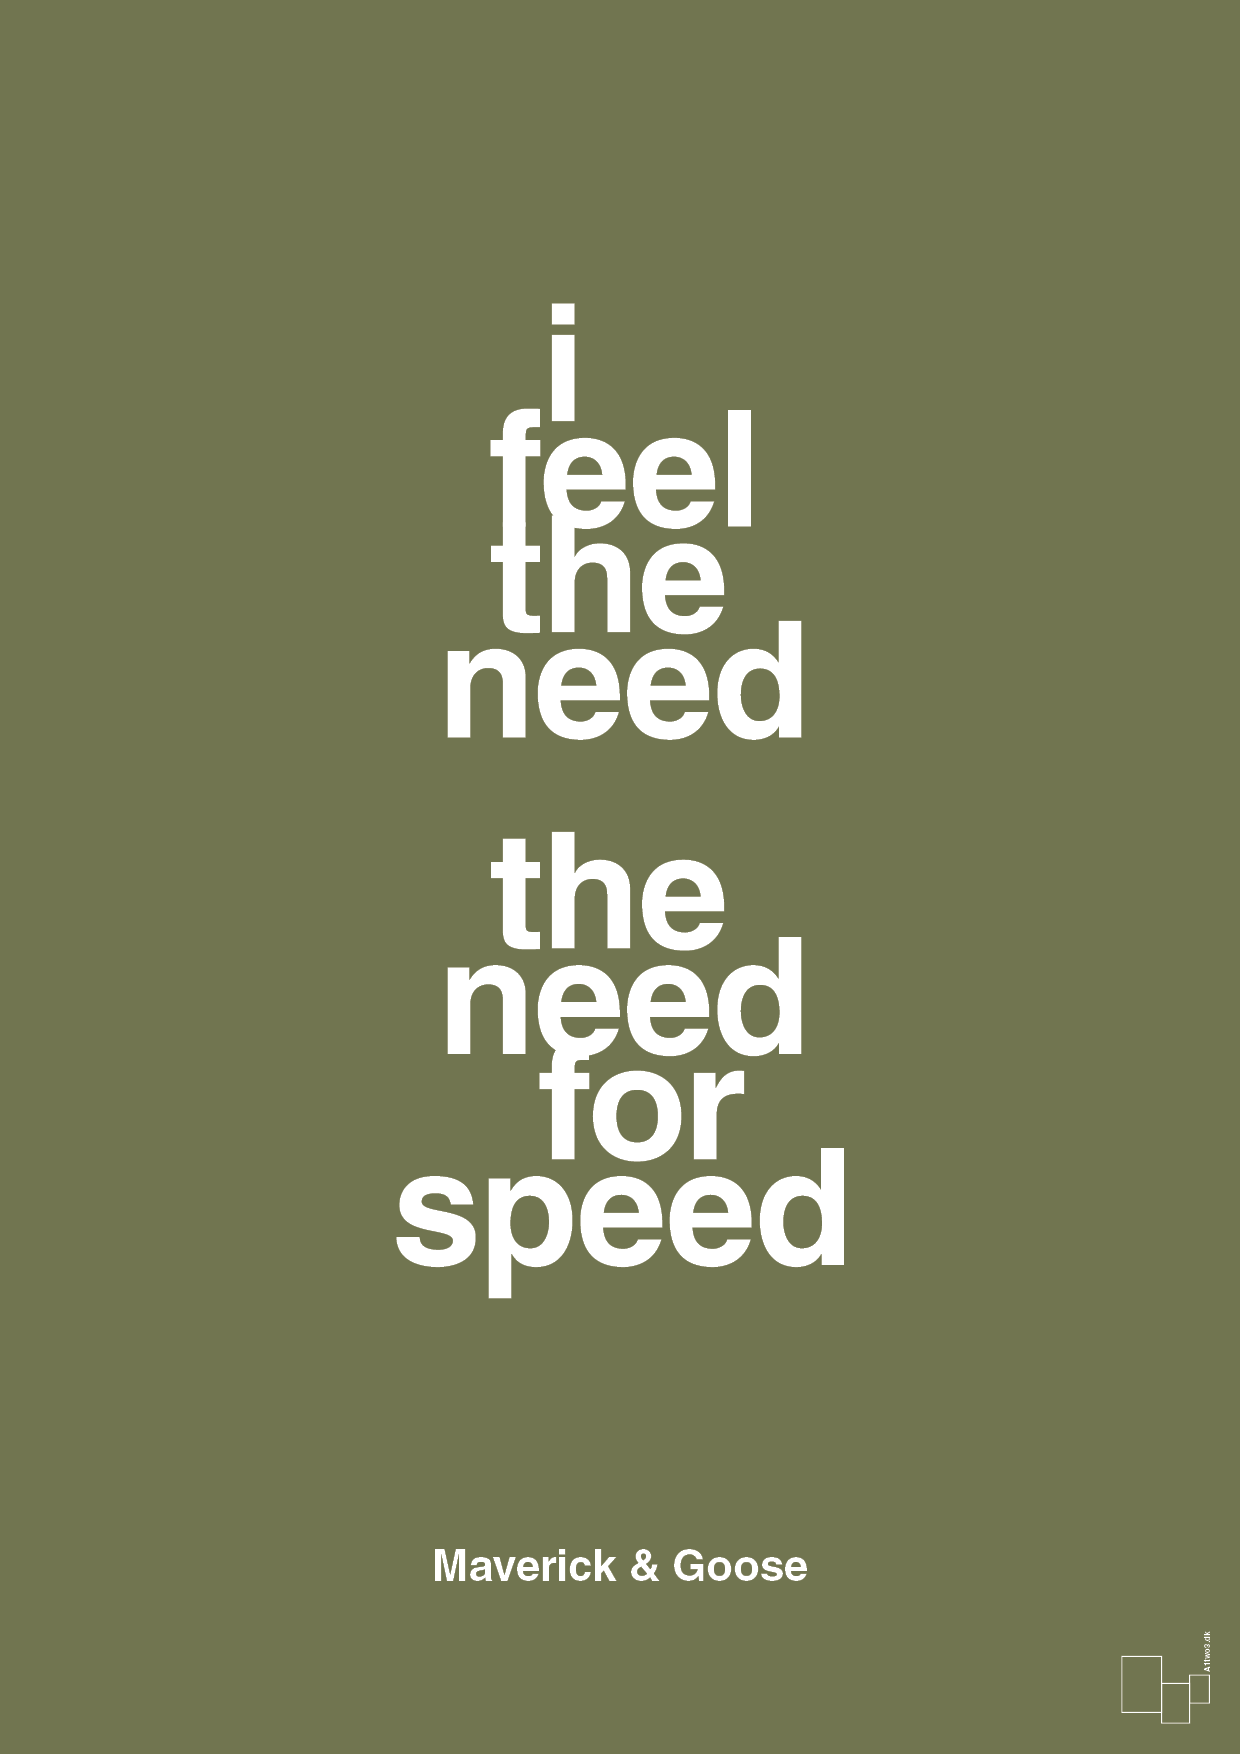 i feel the need the need for speed - Plakat med Citater i Secret Meadow